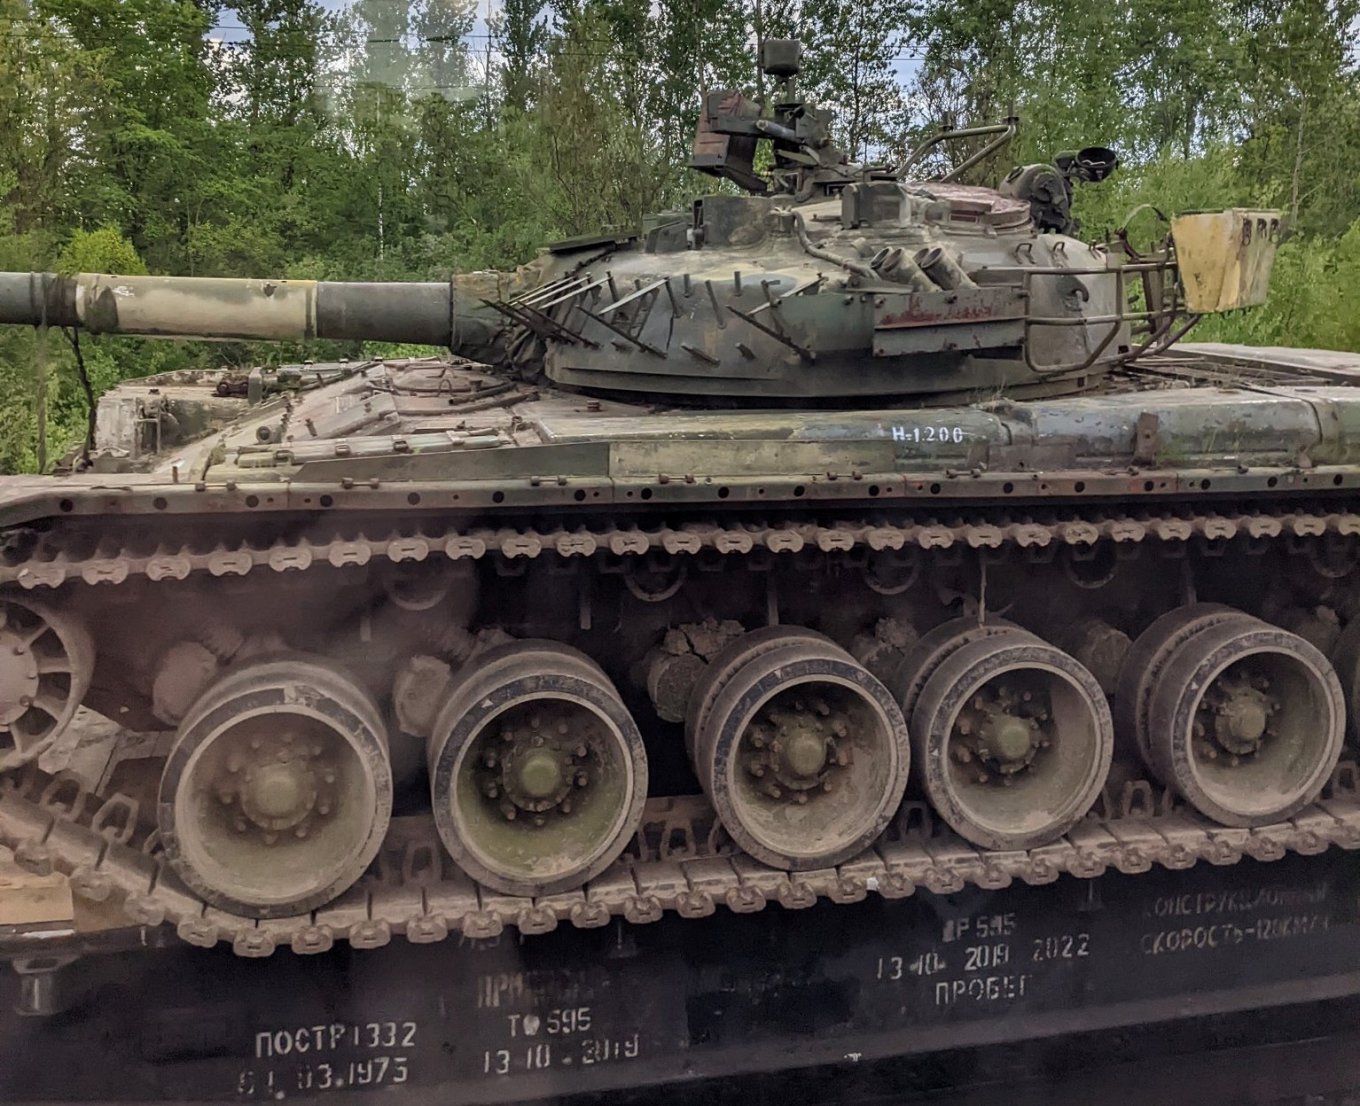 Tanks Overgrown With Weeds Being Taken From Storage In russia: How Long It Takes to Restore Them, Defense Express, war in Ukraine, Russian-Ukrainian war